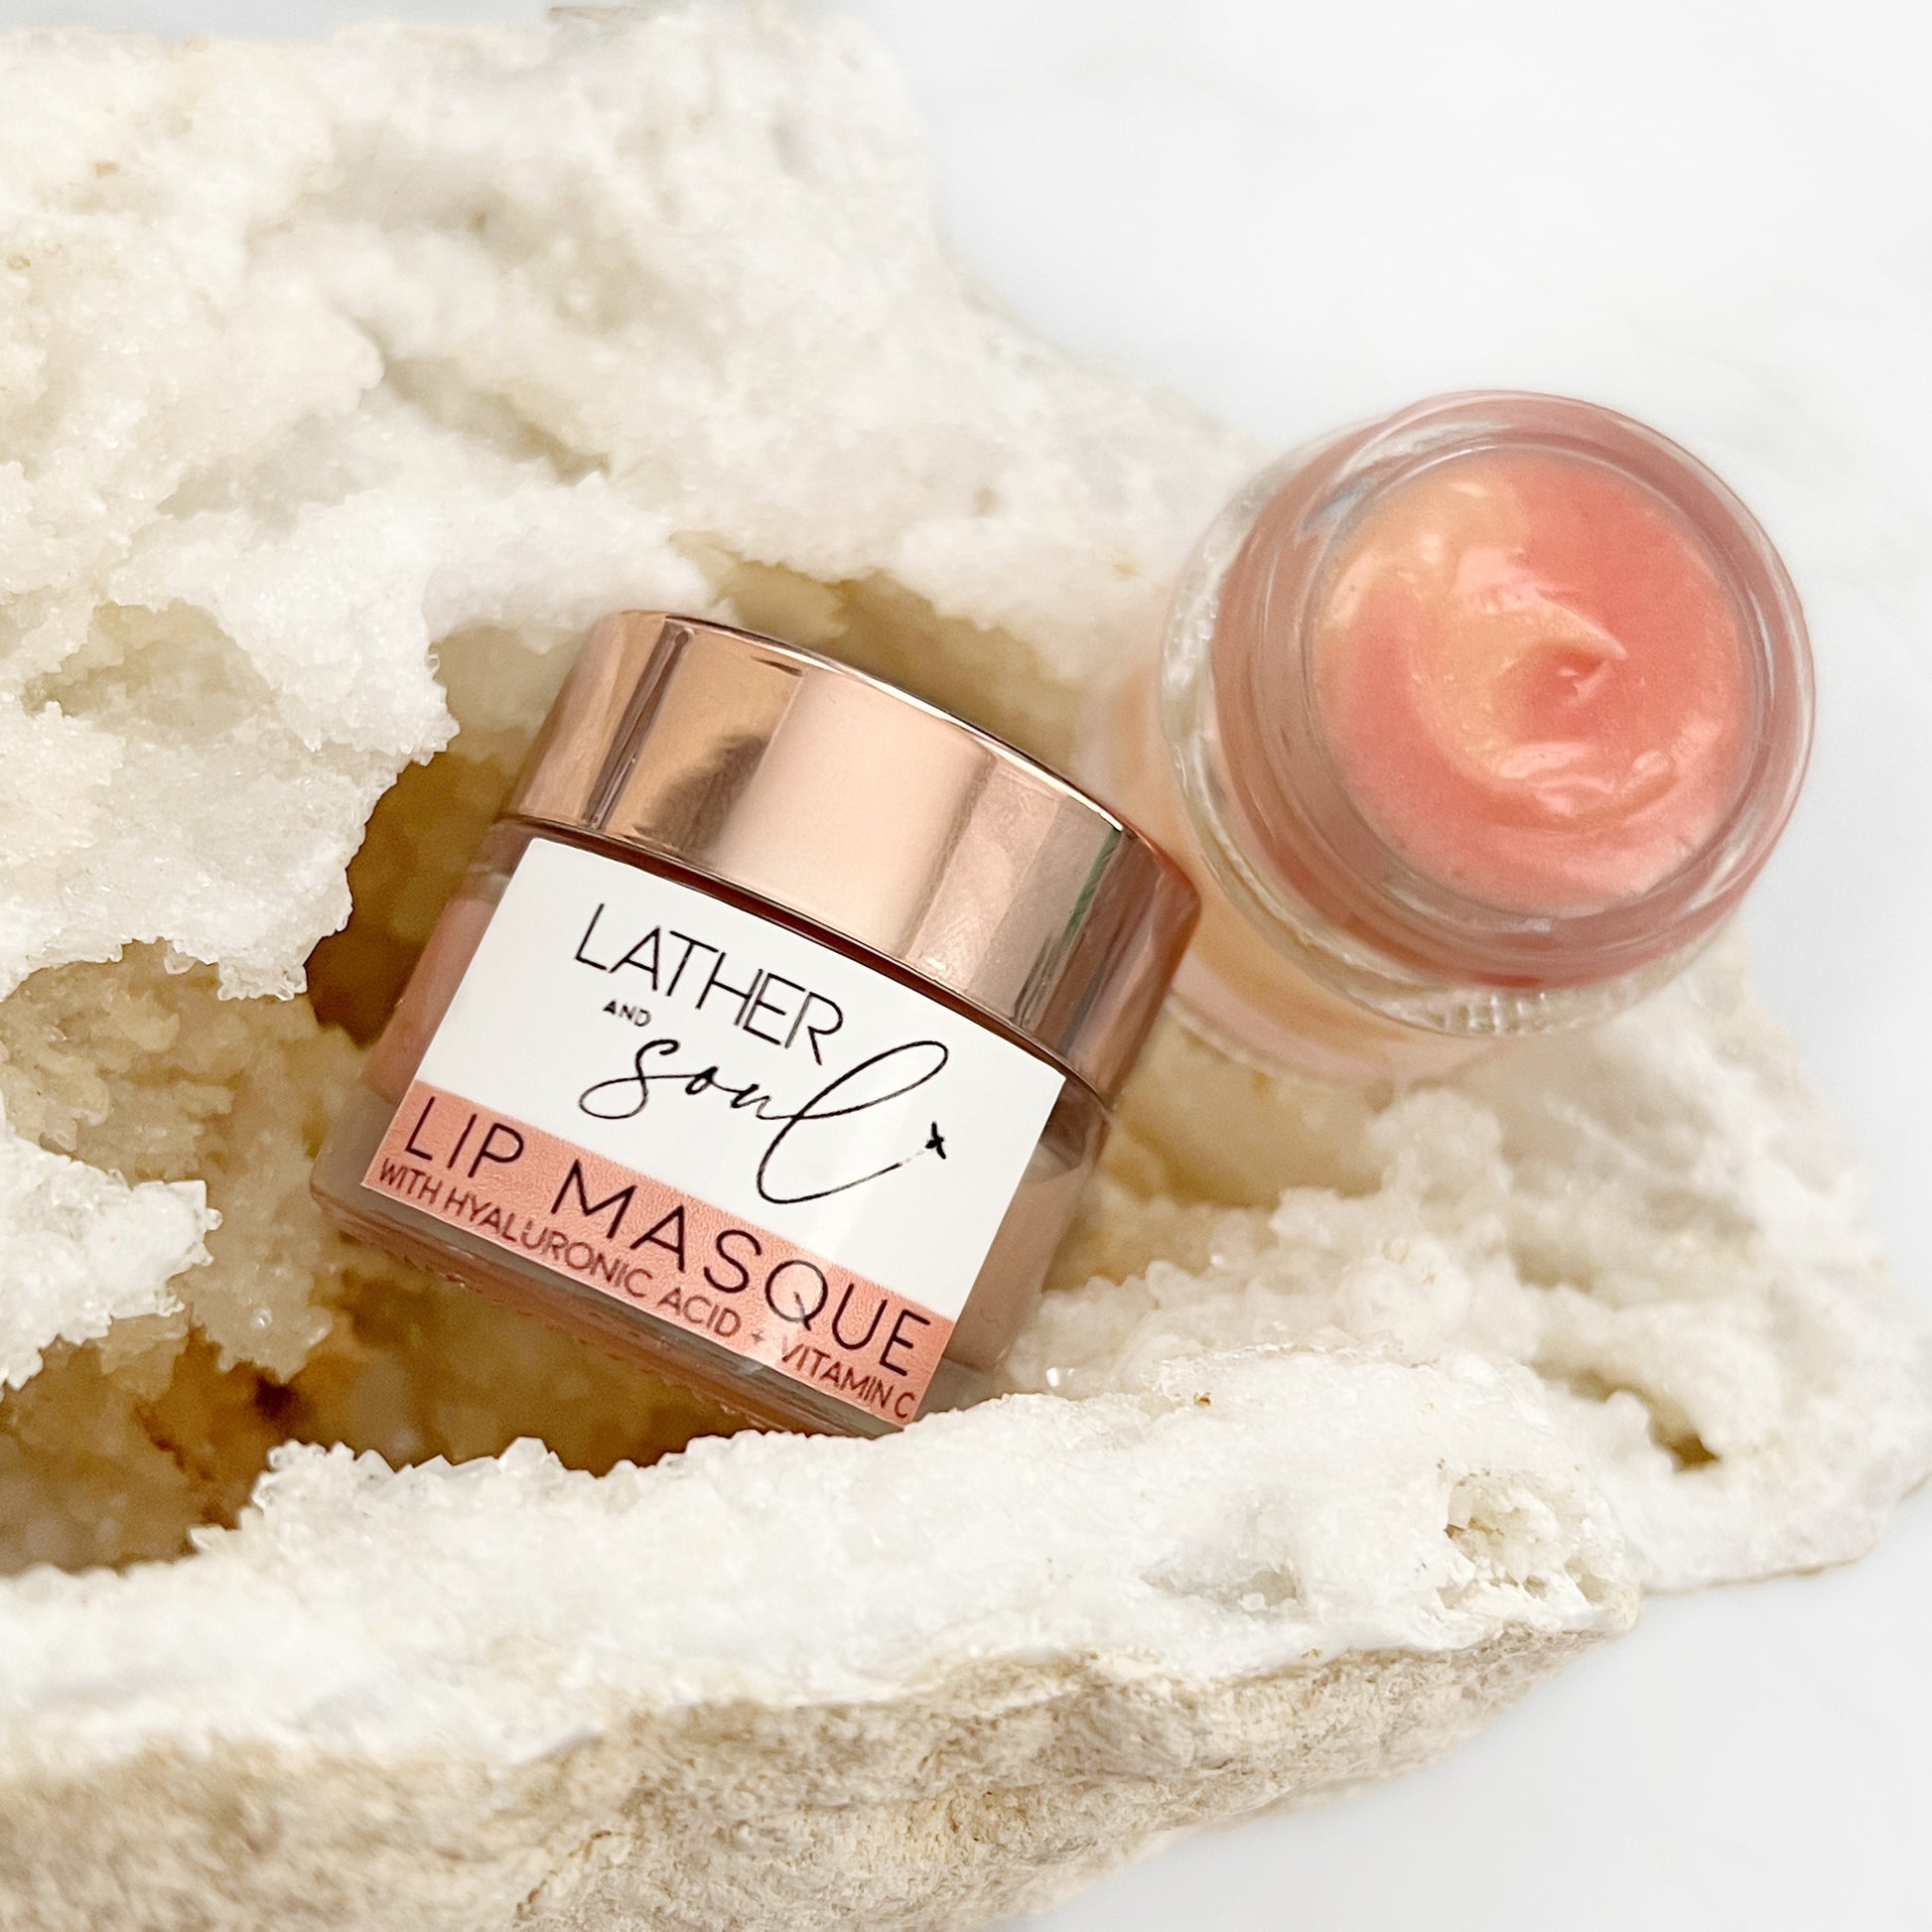 Replenishing Lip Masque: A nourishing lip treatment infused with Hyaluronic Acid, Vitamin C, and Sesame Seed Extract for smoother, plumper, and more youthful-looking lips.